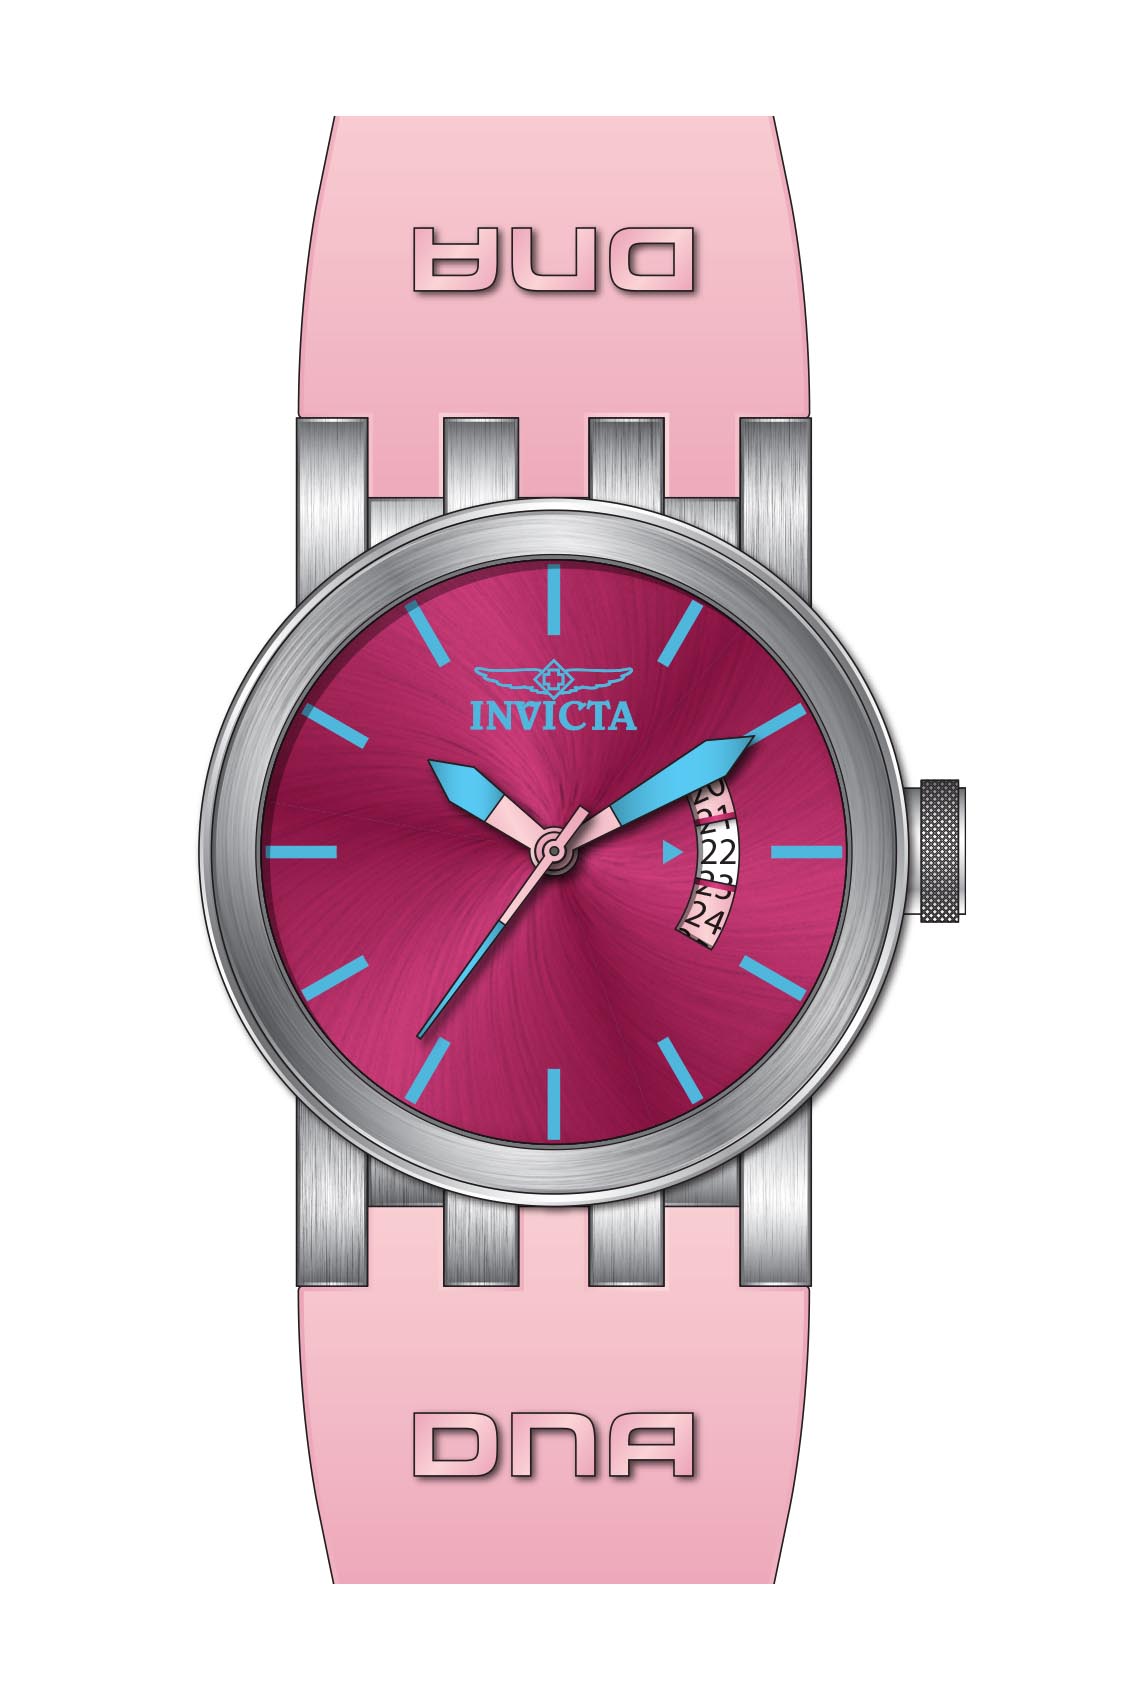 Band for Invicta DNA Lady 36960